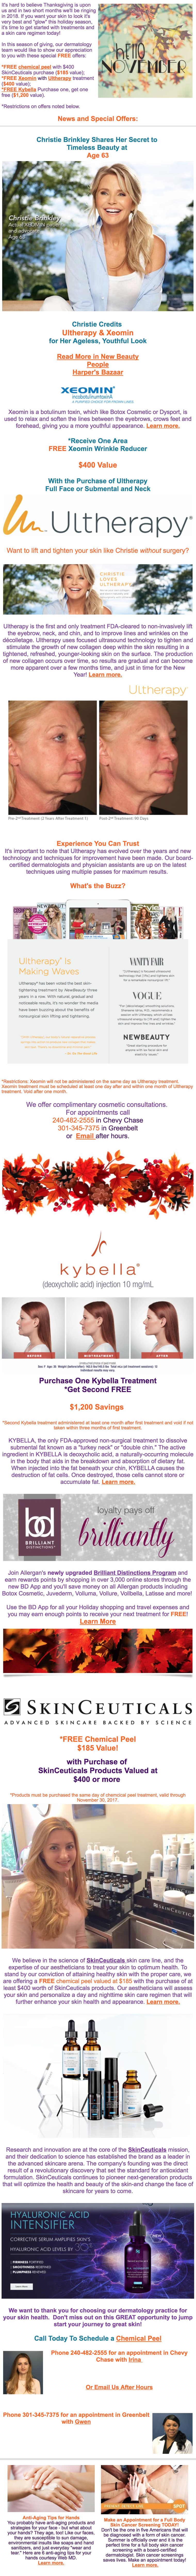 November Discounts on Botox, Chemical Peels in MD 